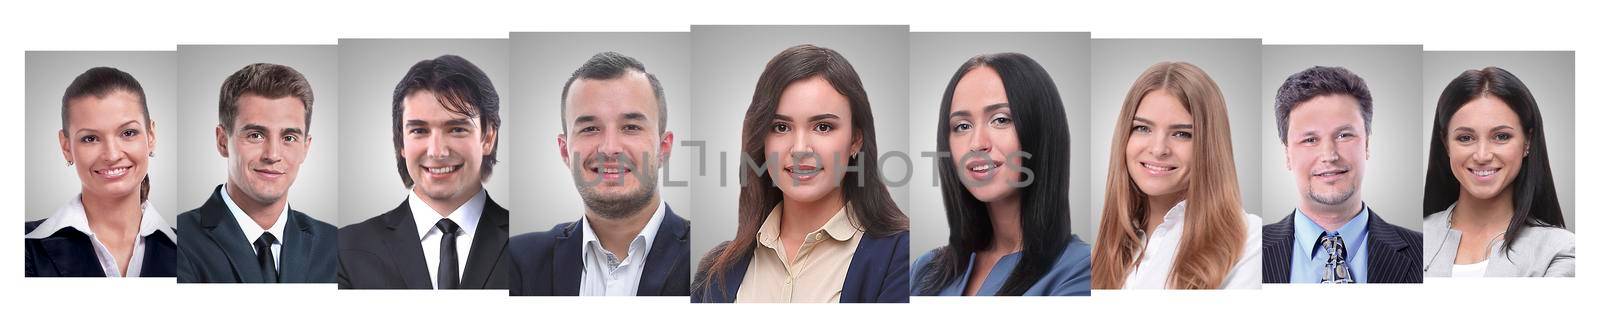 panoramic collage of portraits of young entrepreneurs. business concept